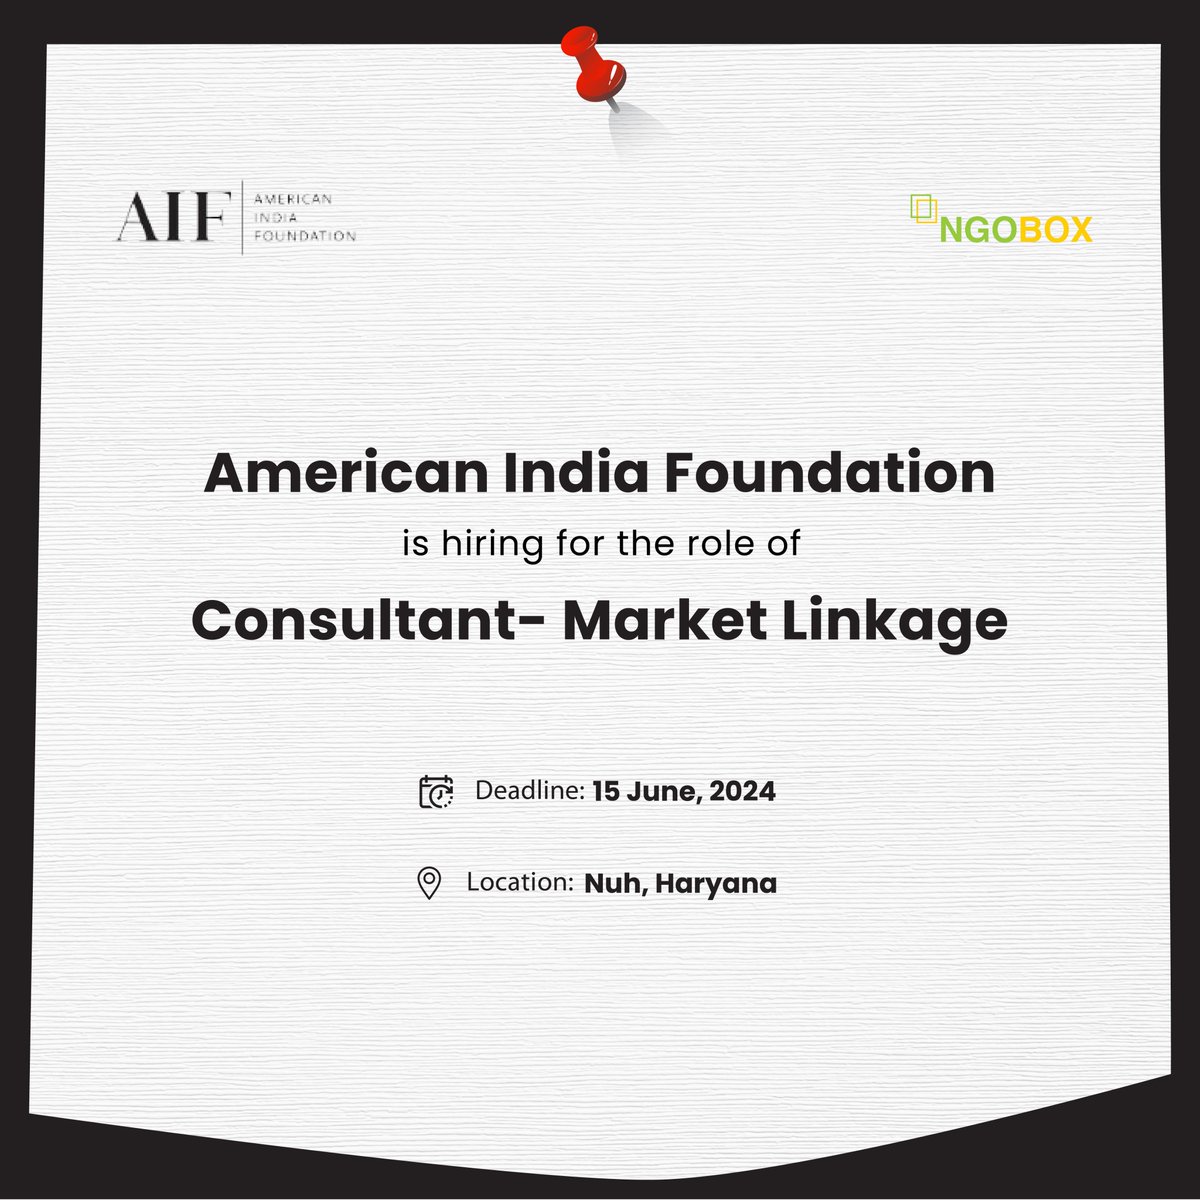 Join the @AIFoundation as a Consultant in Market Linkage! Are you equipped with at least a B.A. or B. Sc Degree in Marketing, Social Work, or a similar discipline? This could be your chance to shine! Apply now: ngobox.org/job-detail_Con… #JobOpening #Consultant